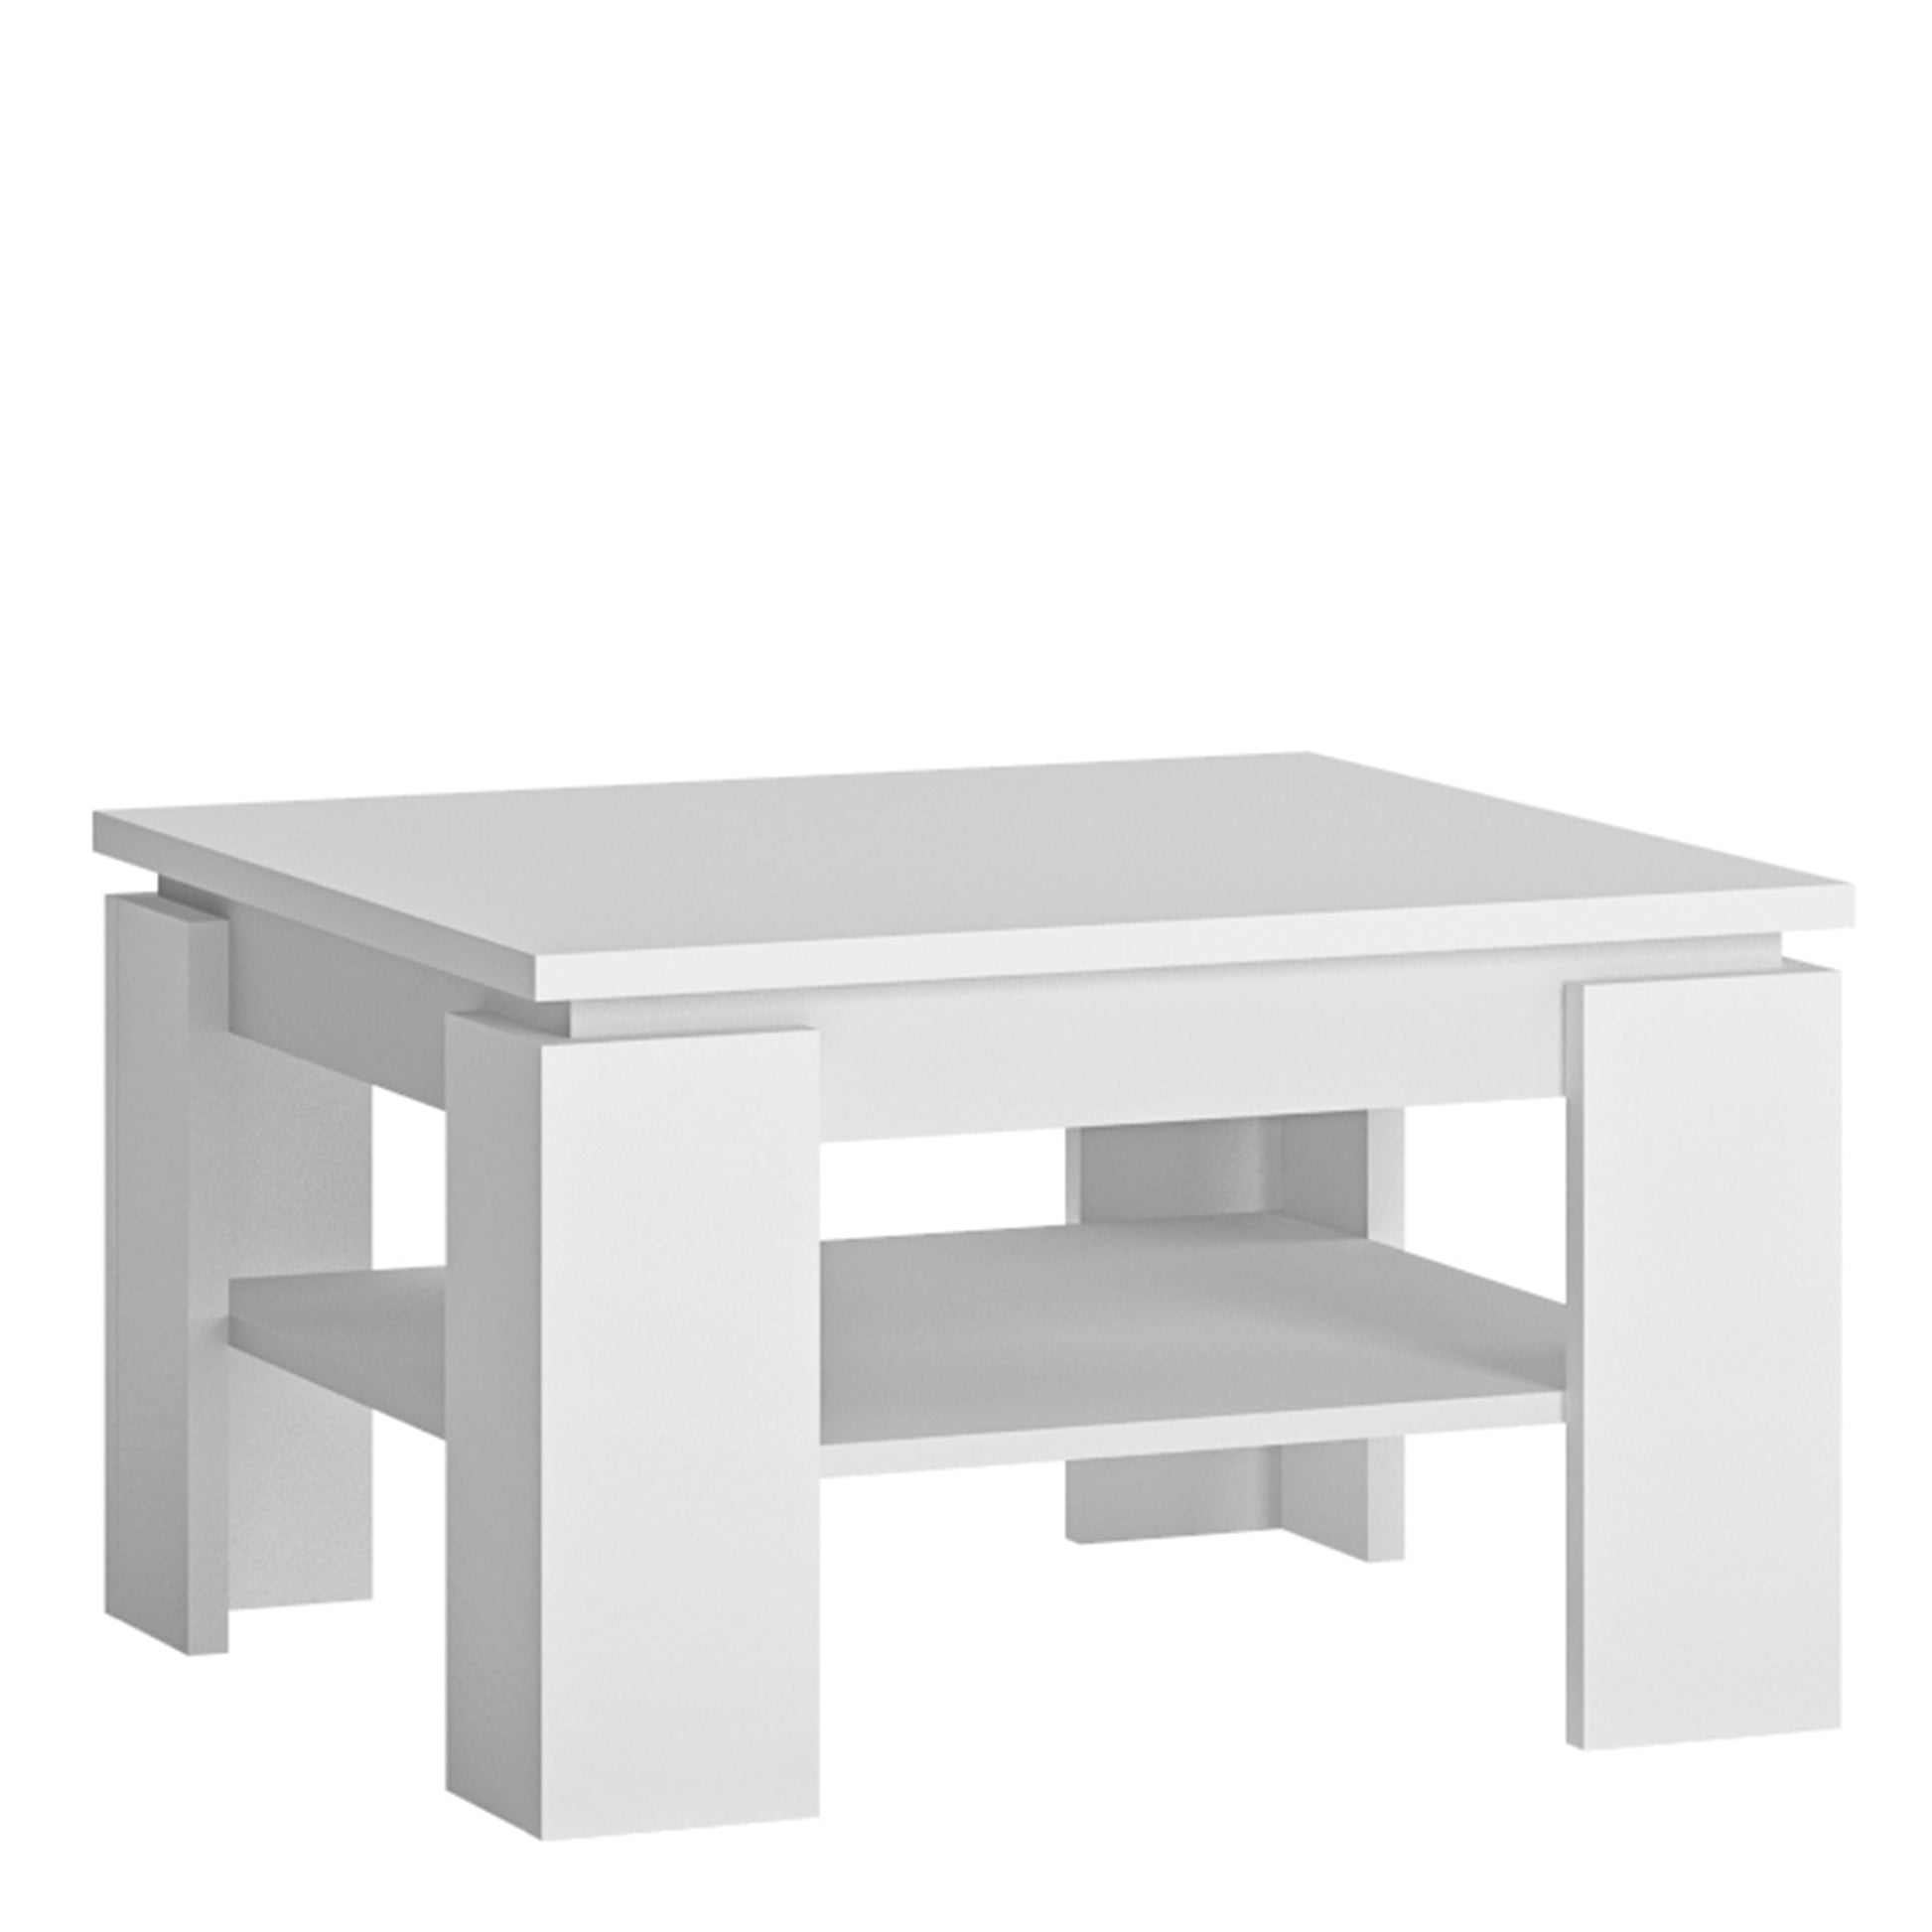 Fribo White Fribo Small coffee table in White